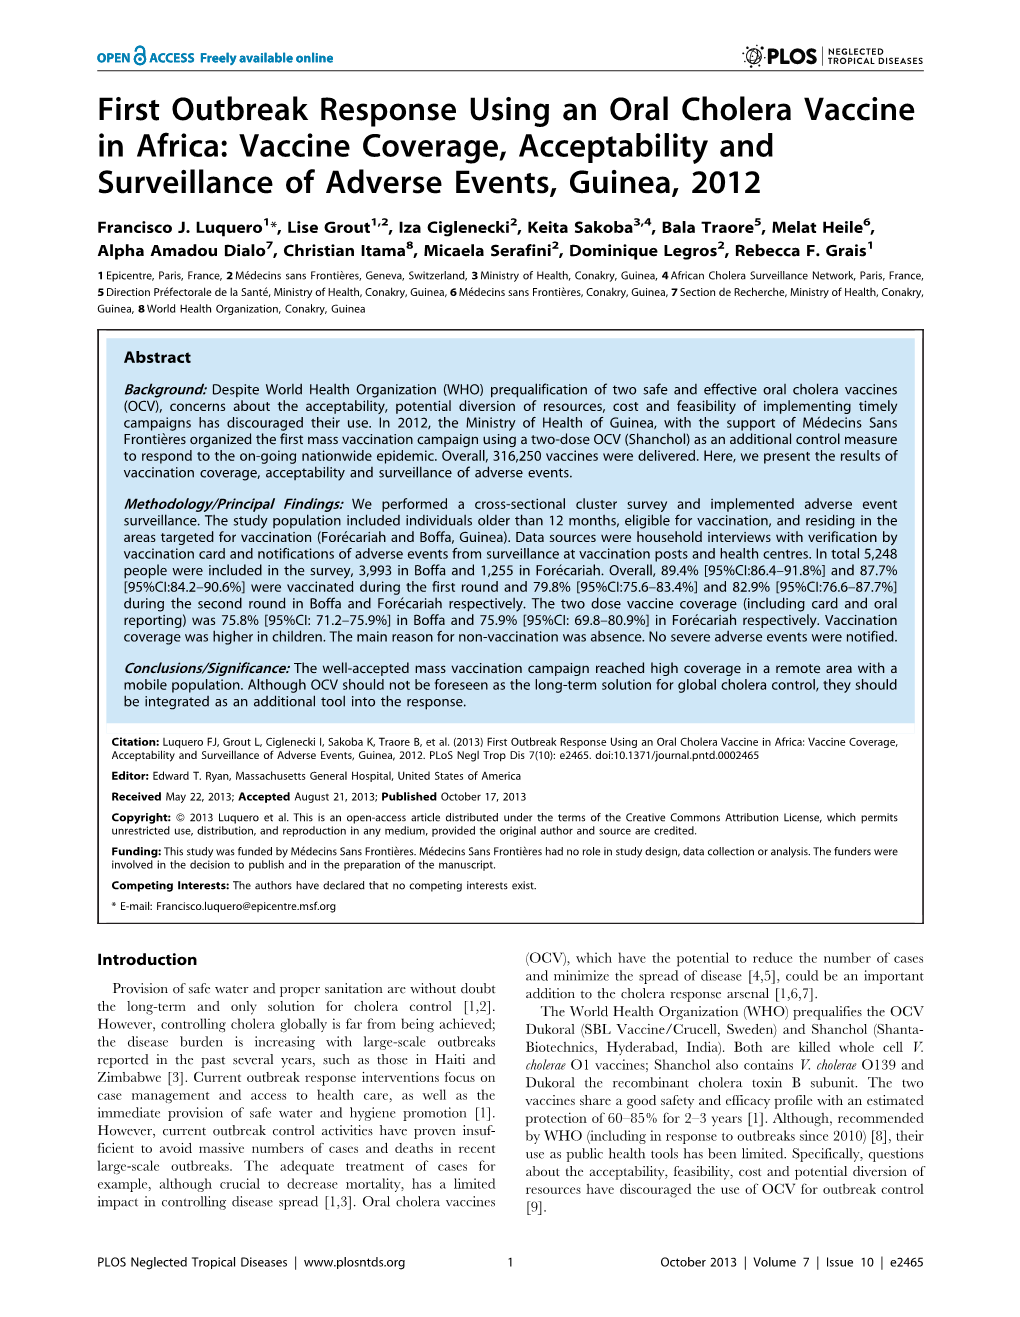 First Outbreak Response Using an Oral Cholera Vaccine in Africa: Vaccine Coverage, Acceptability and Surveillance of Adverse Events, Guinea, 2012